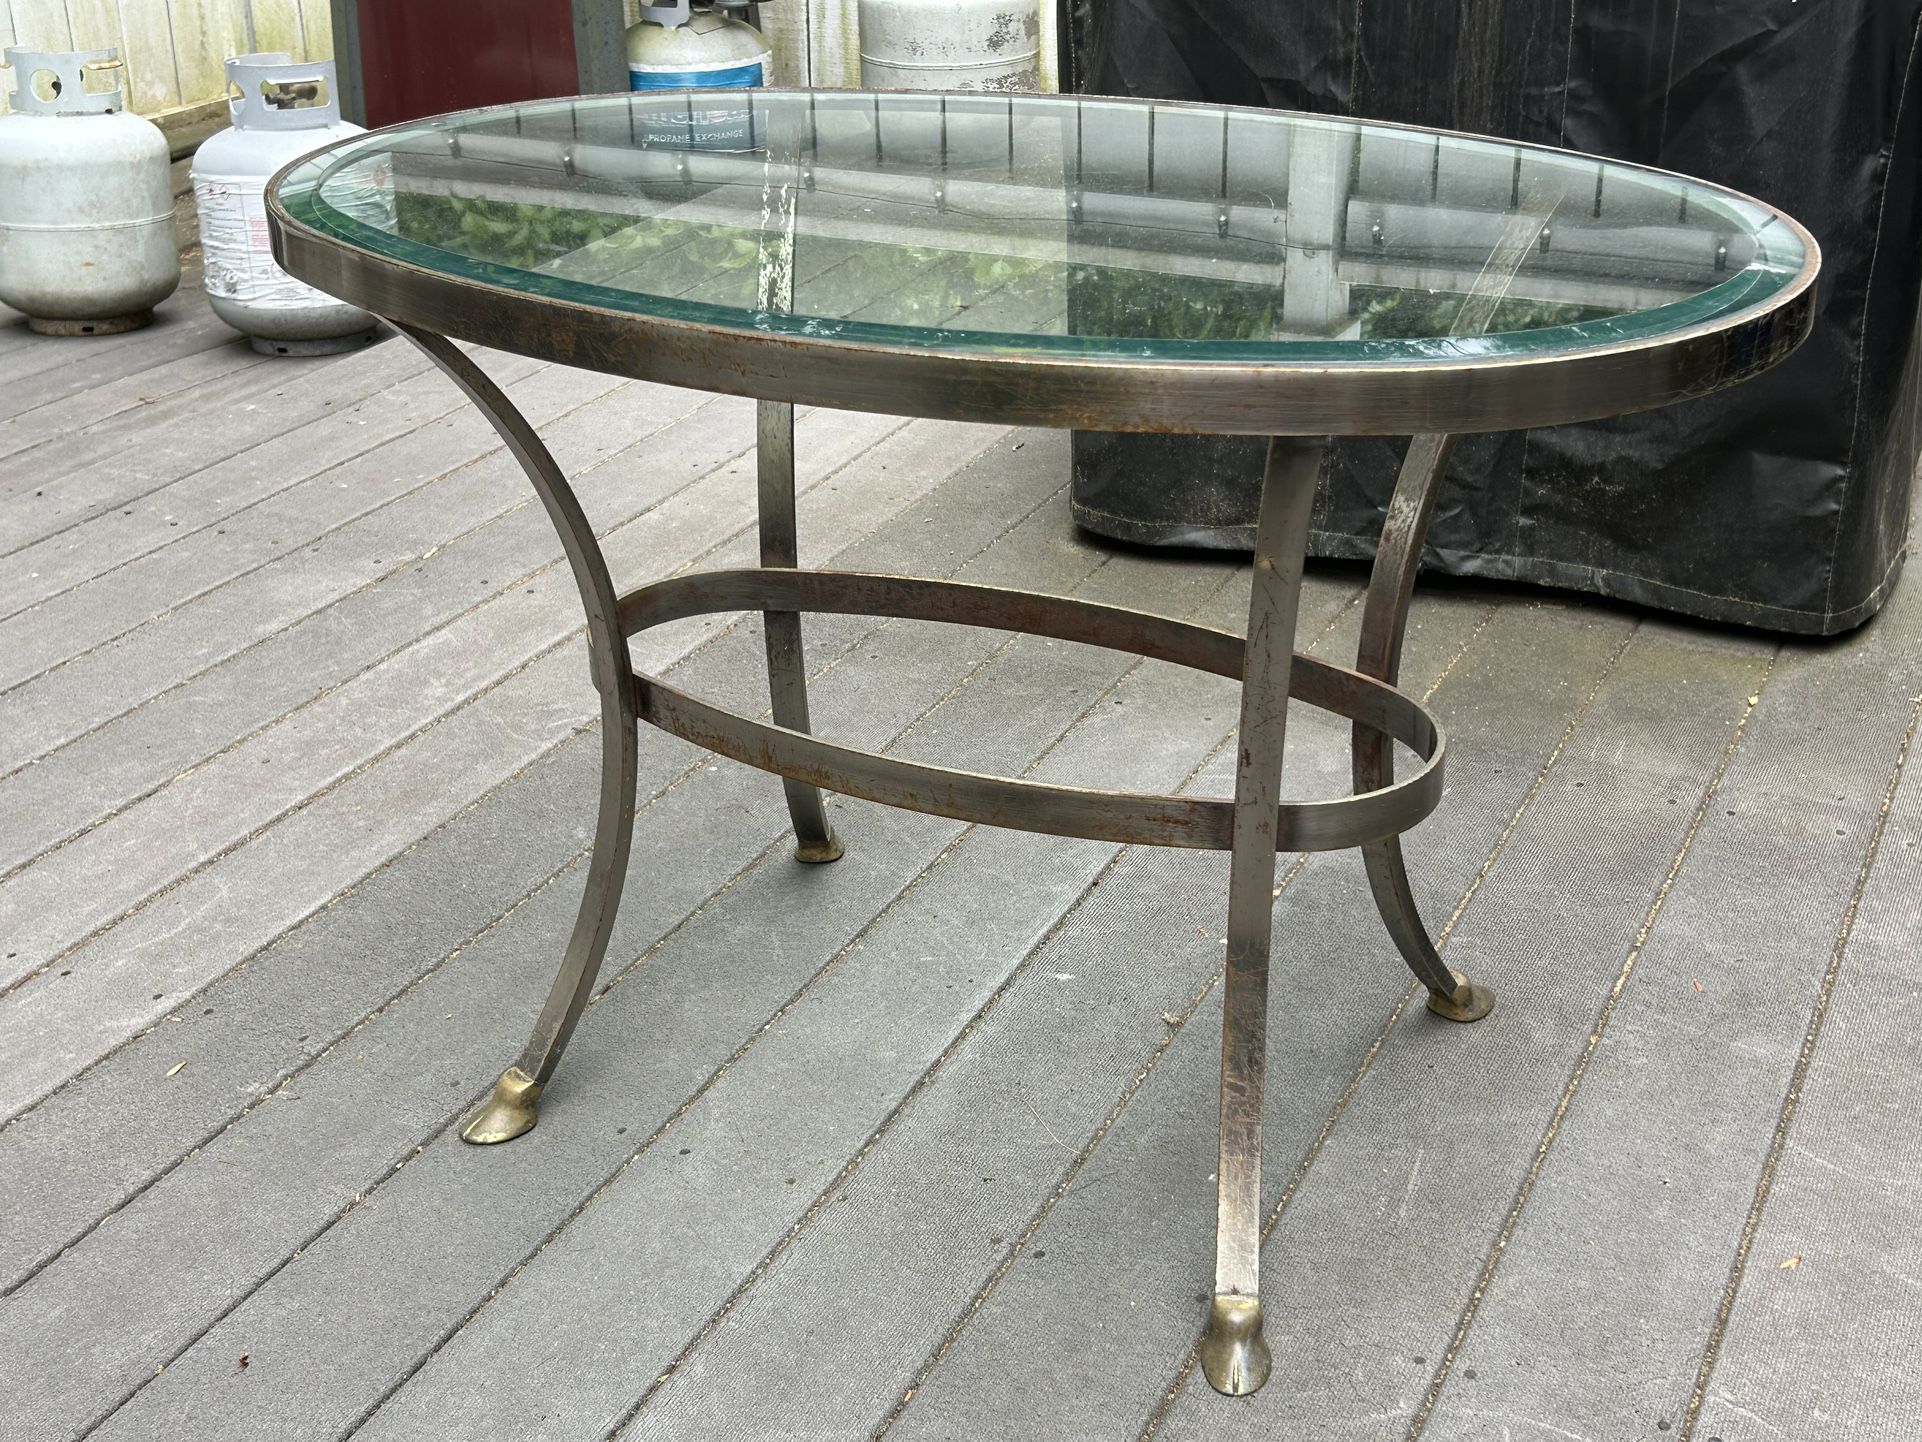 Outdoor Patio Table - Glass Top - Metal Base